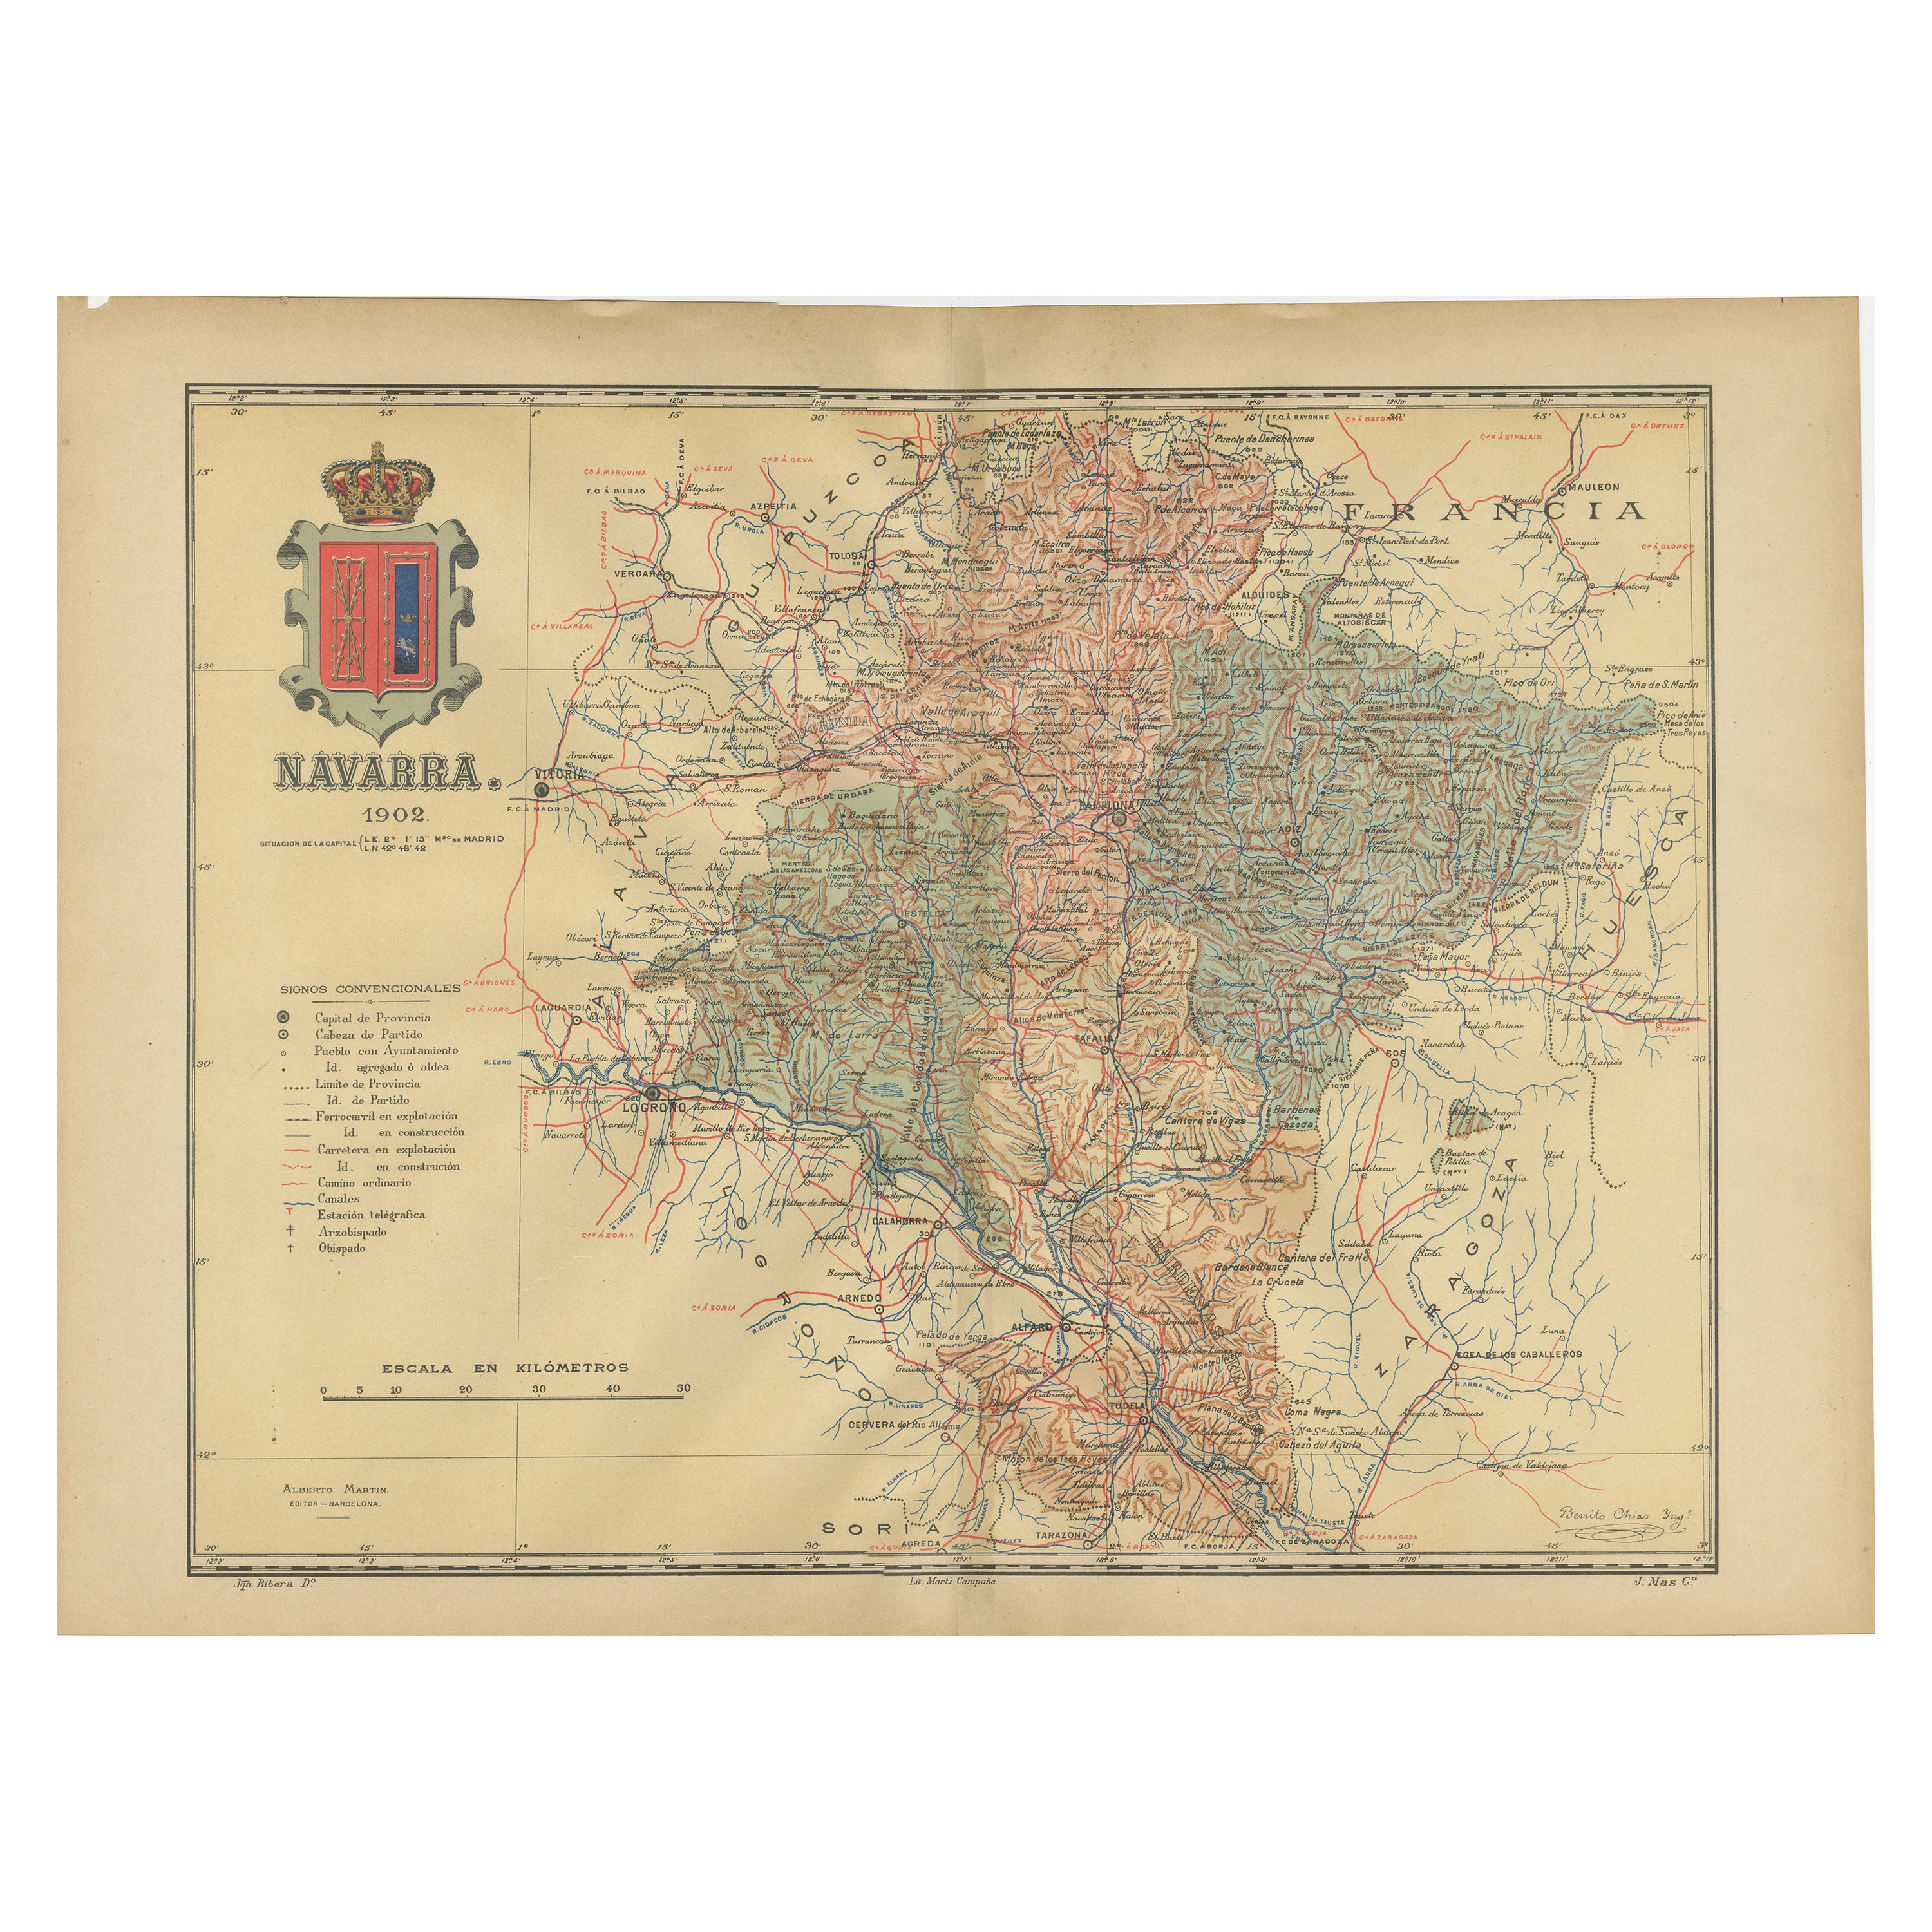 Navarra in Cartographic Detail: A 1902 Map of the Crossroads of Northern Spain For Sale